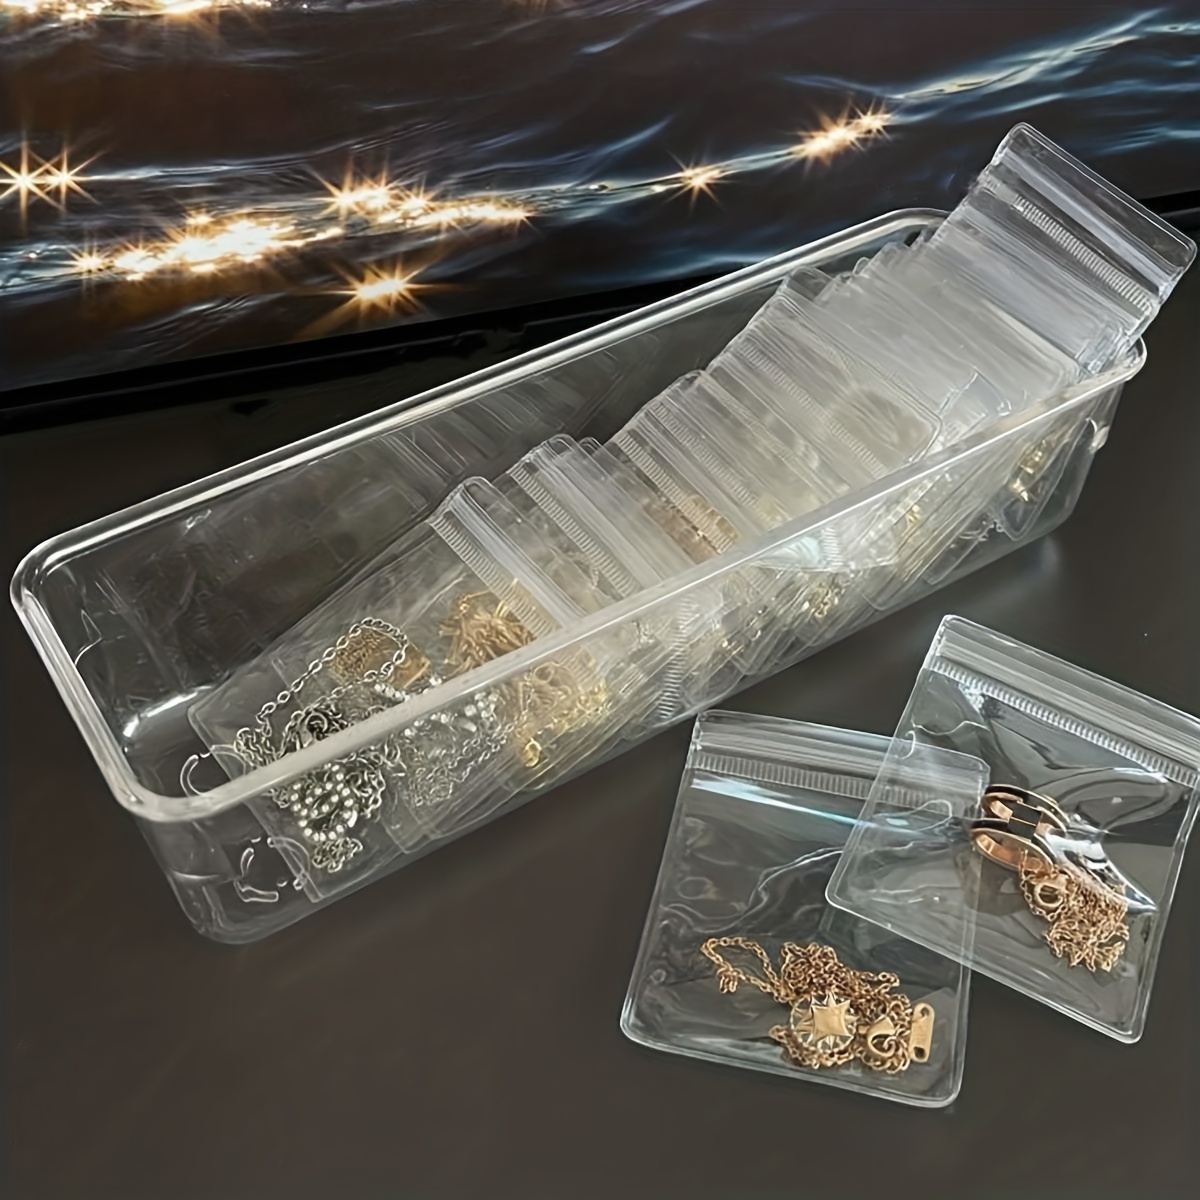 Jewelry Storage Bags, Resealable Plastic Bags for Dainty Necklaces